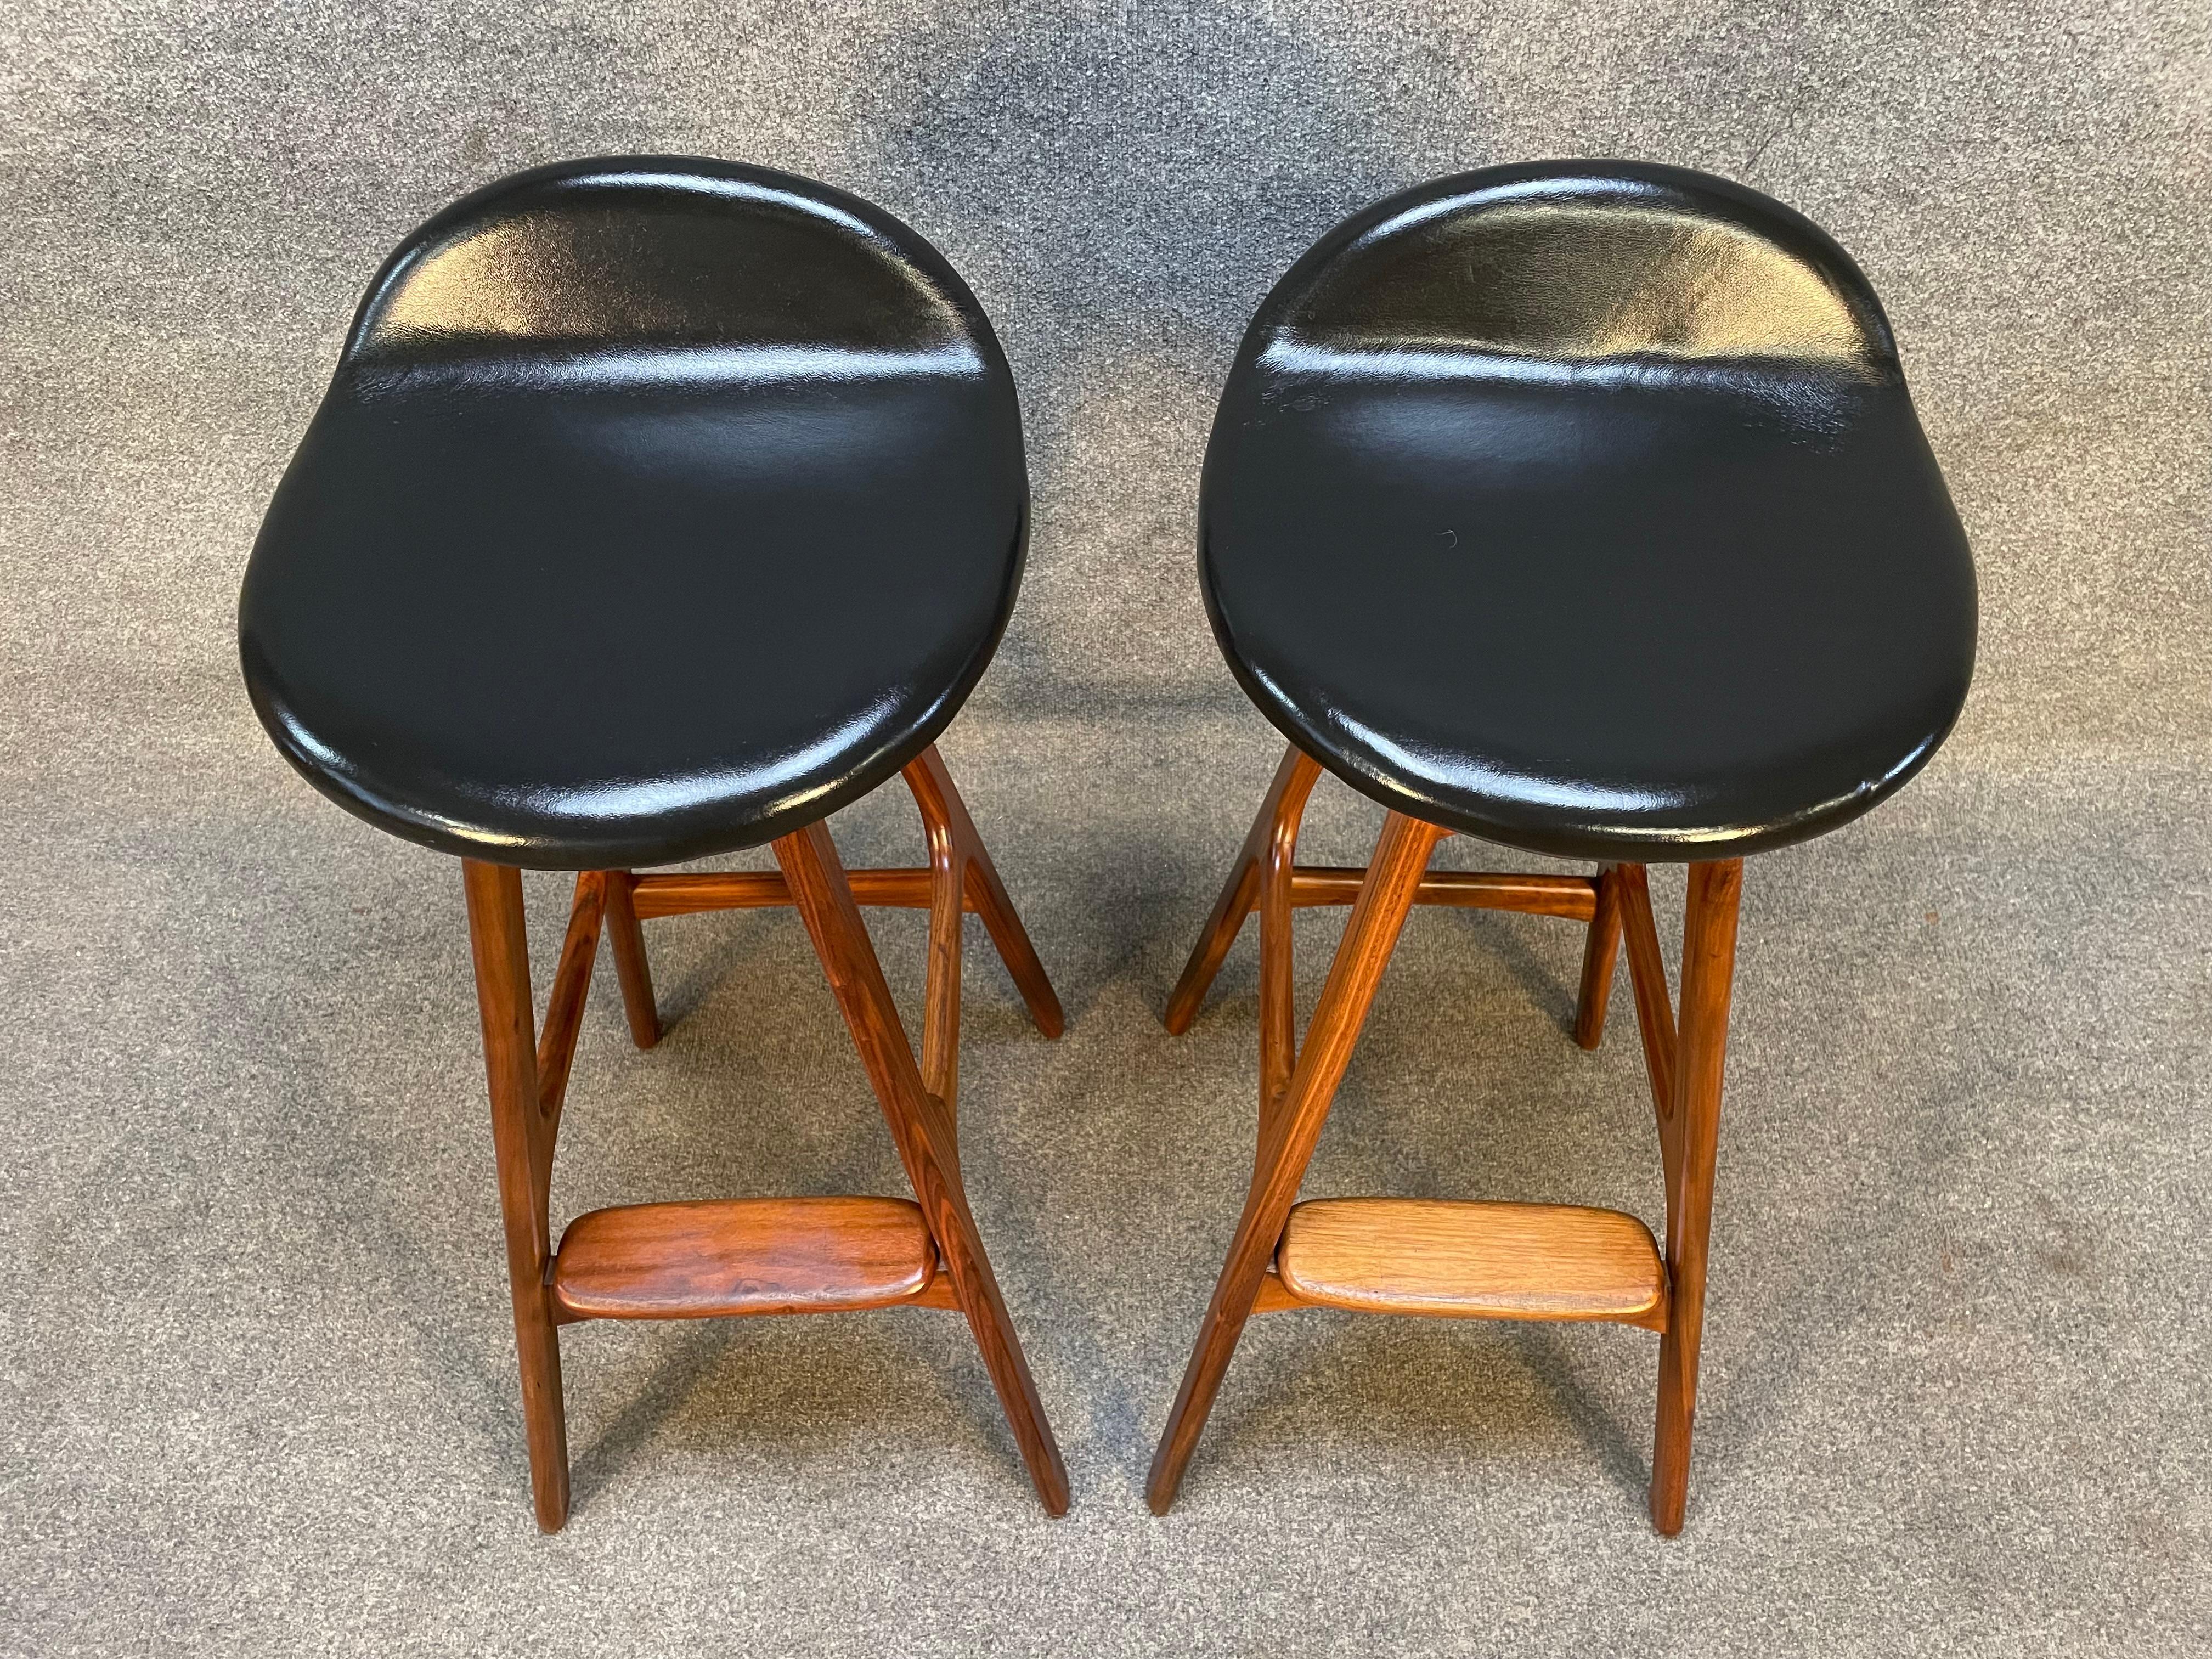 Here is a set of pair Scandinavian Mid-Century Modern bar stool in solid walnut designed by Erik Buch and manufactured by Odense Mobeklfabrik in Denmark ion the 1960's.
These four comfortable stools, recently imported from Europe to California